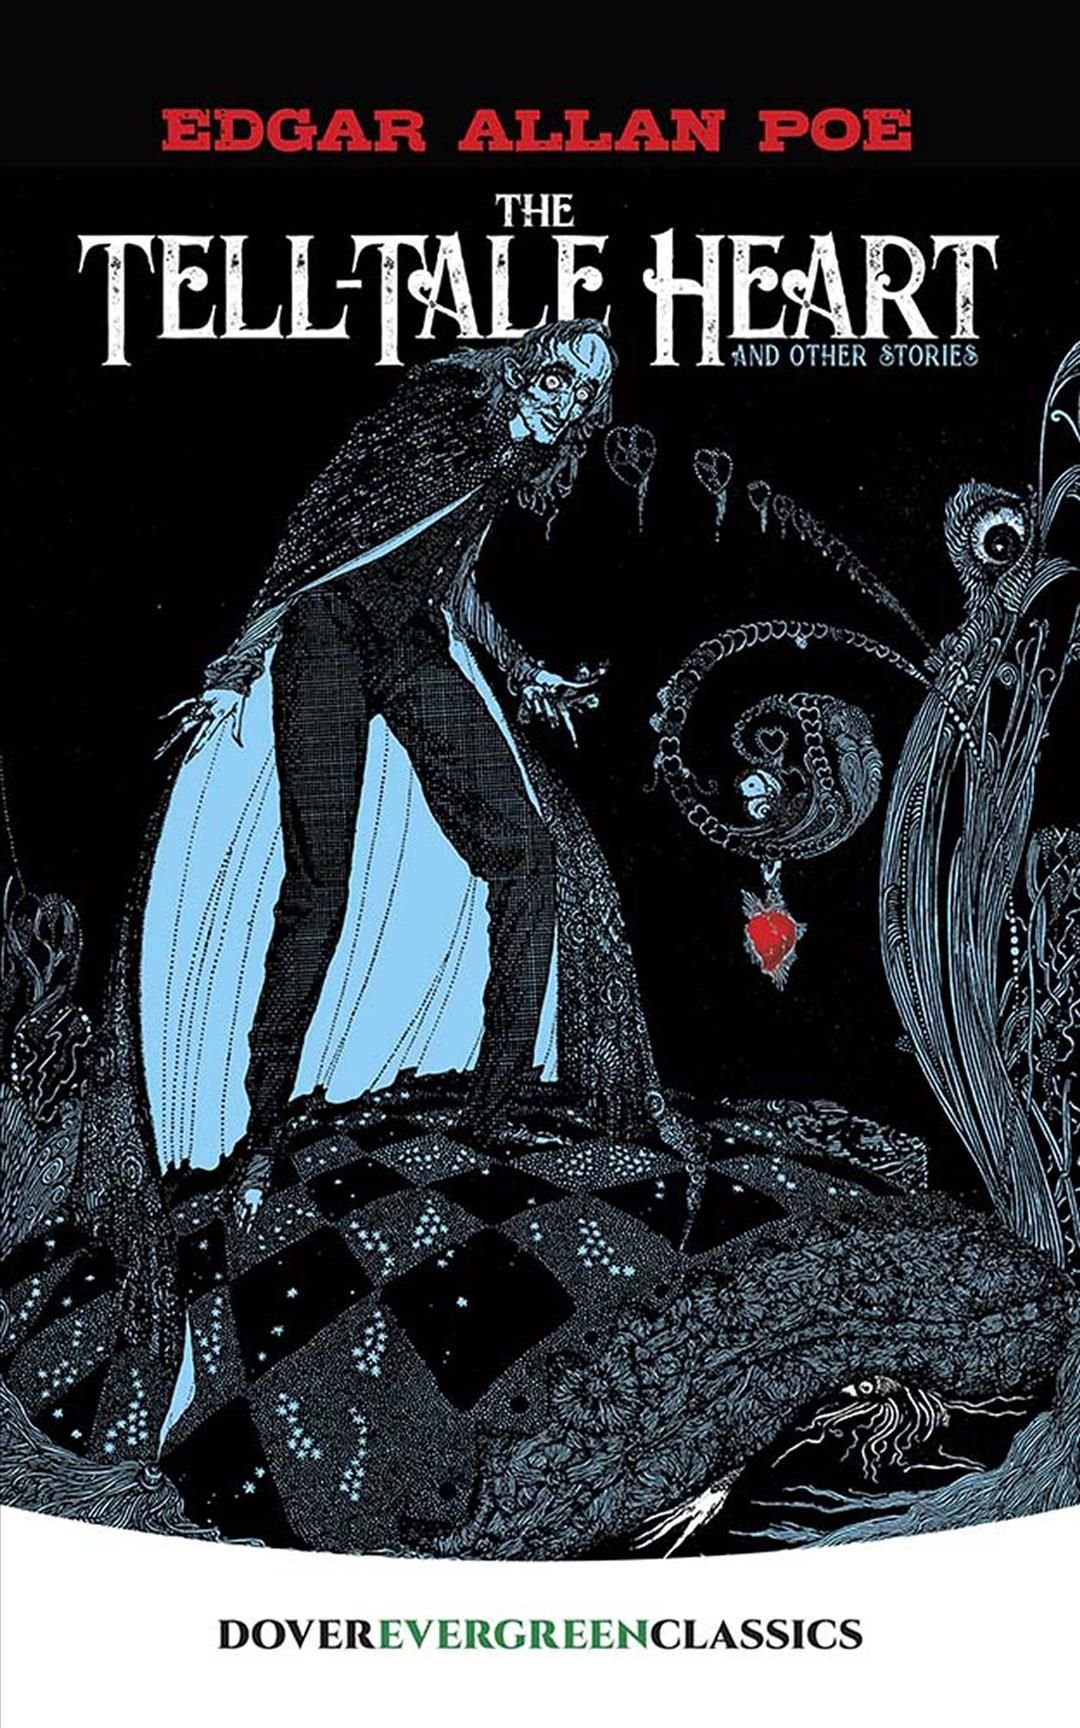 Buy Tell-Tale Heart by Edgar Allan Poe With Free Delivery | wordery.com